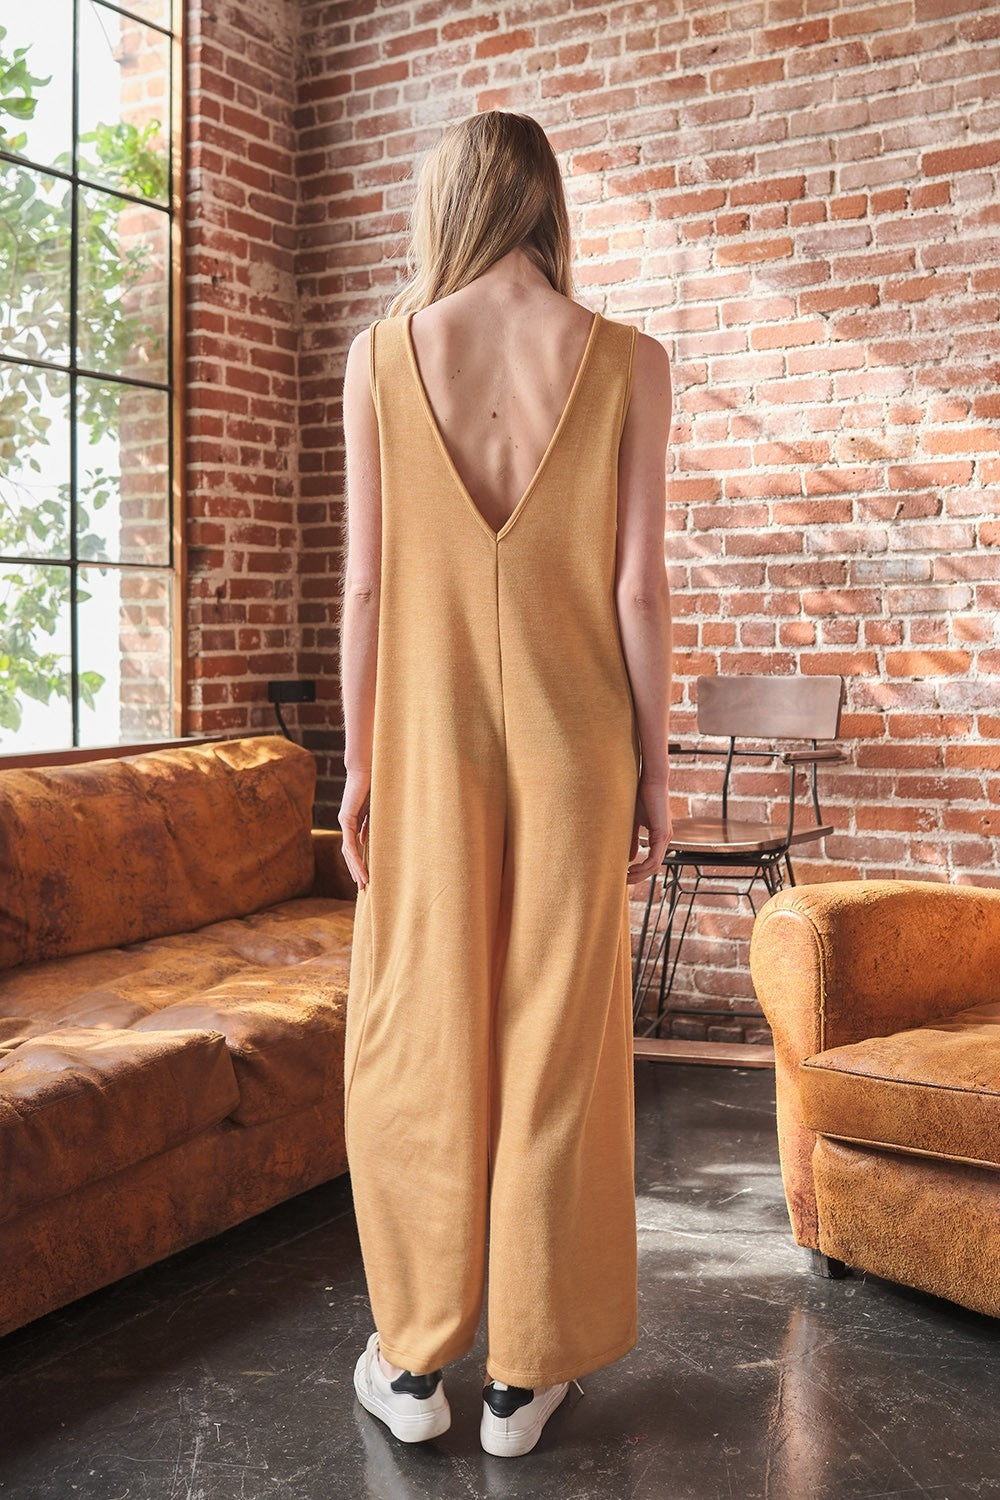 The V-Neck Sleeveless Wide Leg Jumpsuit is a chic wardrobe staple. The flattering v-neck design elongates the neckline for a slimming effect. With a sleeveless silhouette and wide leg pants, this jumpsuit offers a modern and sophisticated look.  S - L